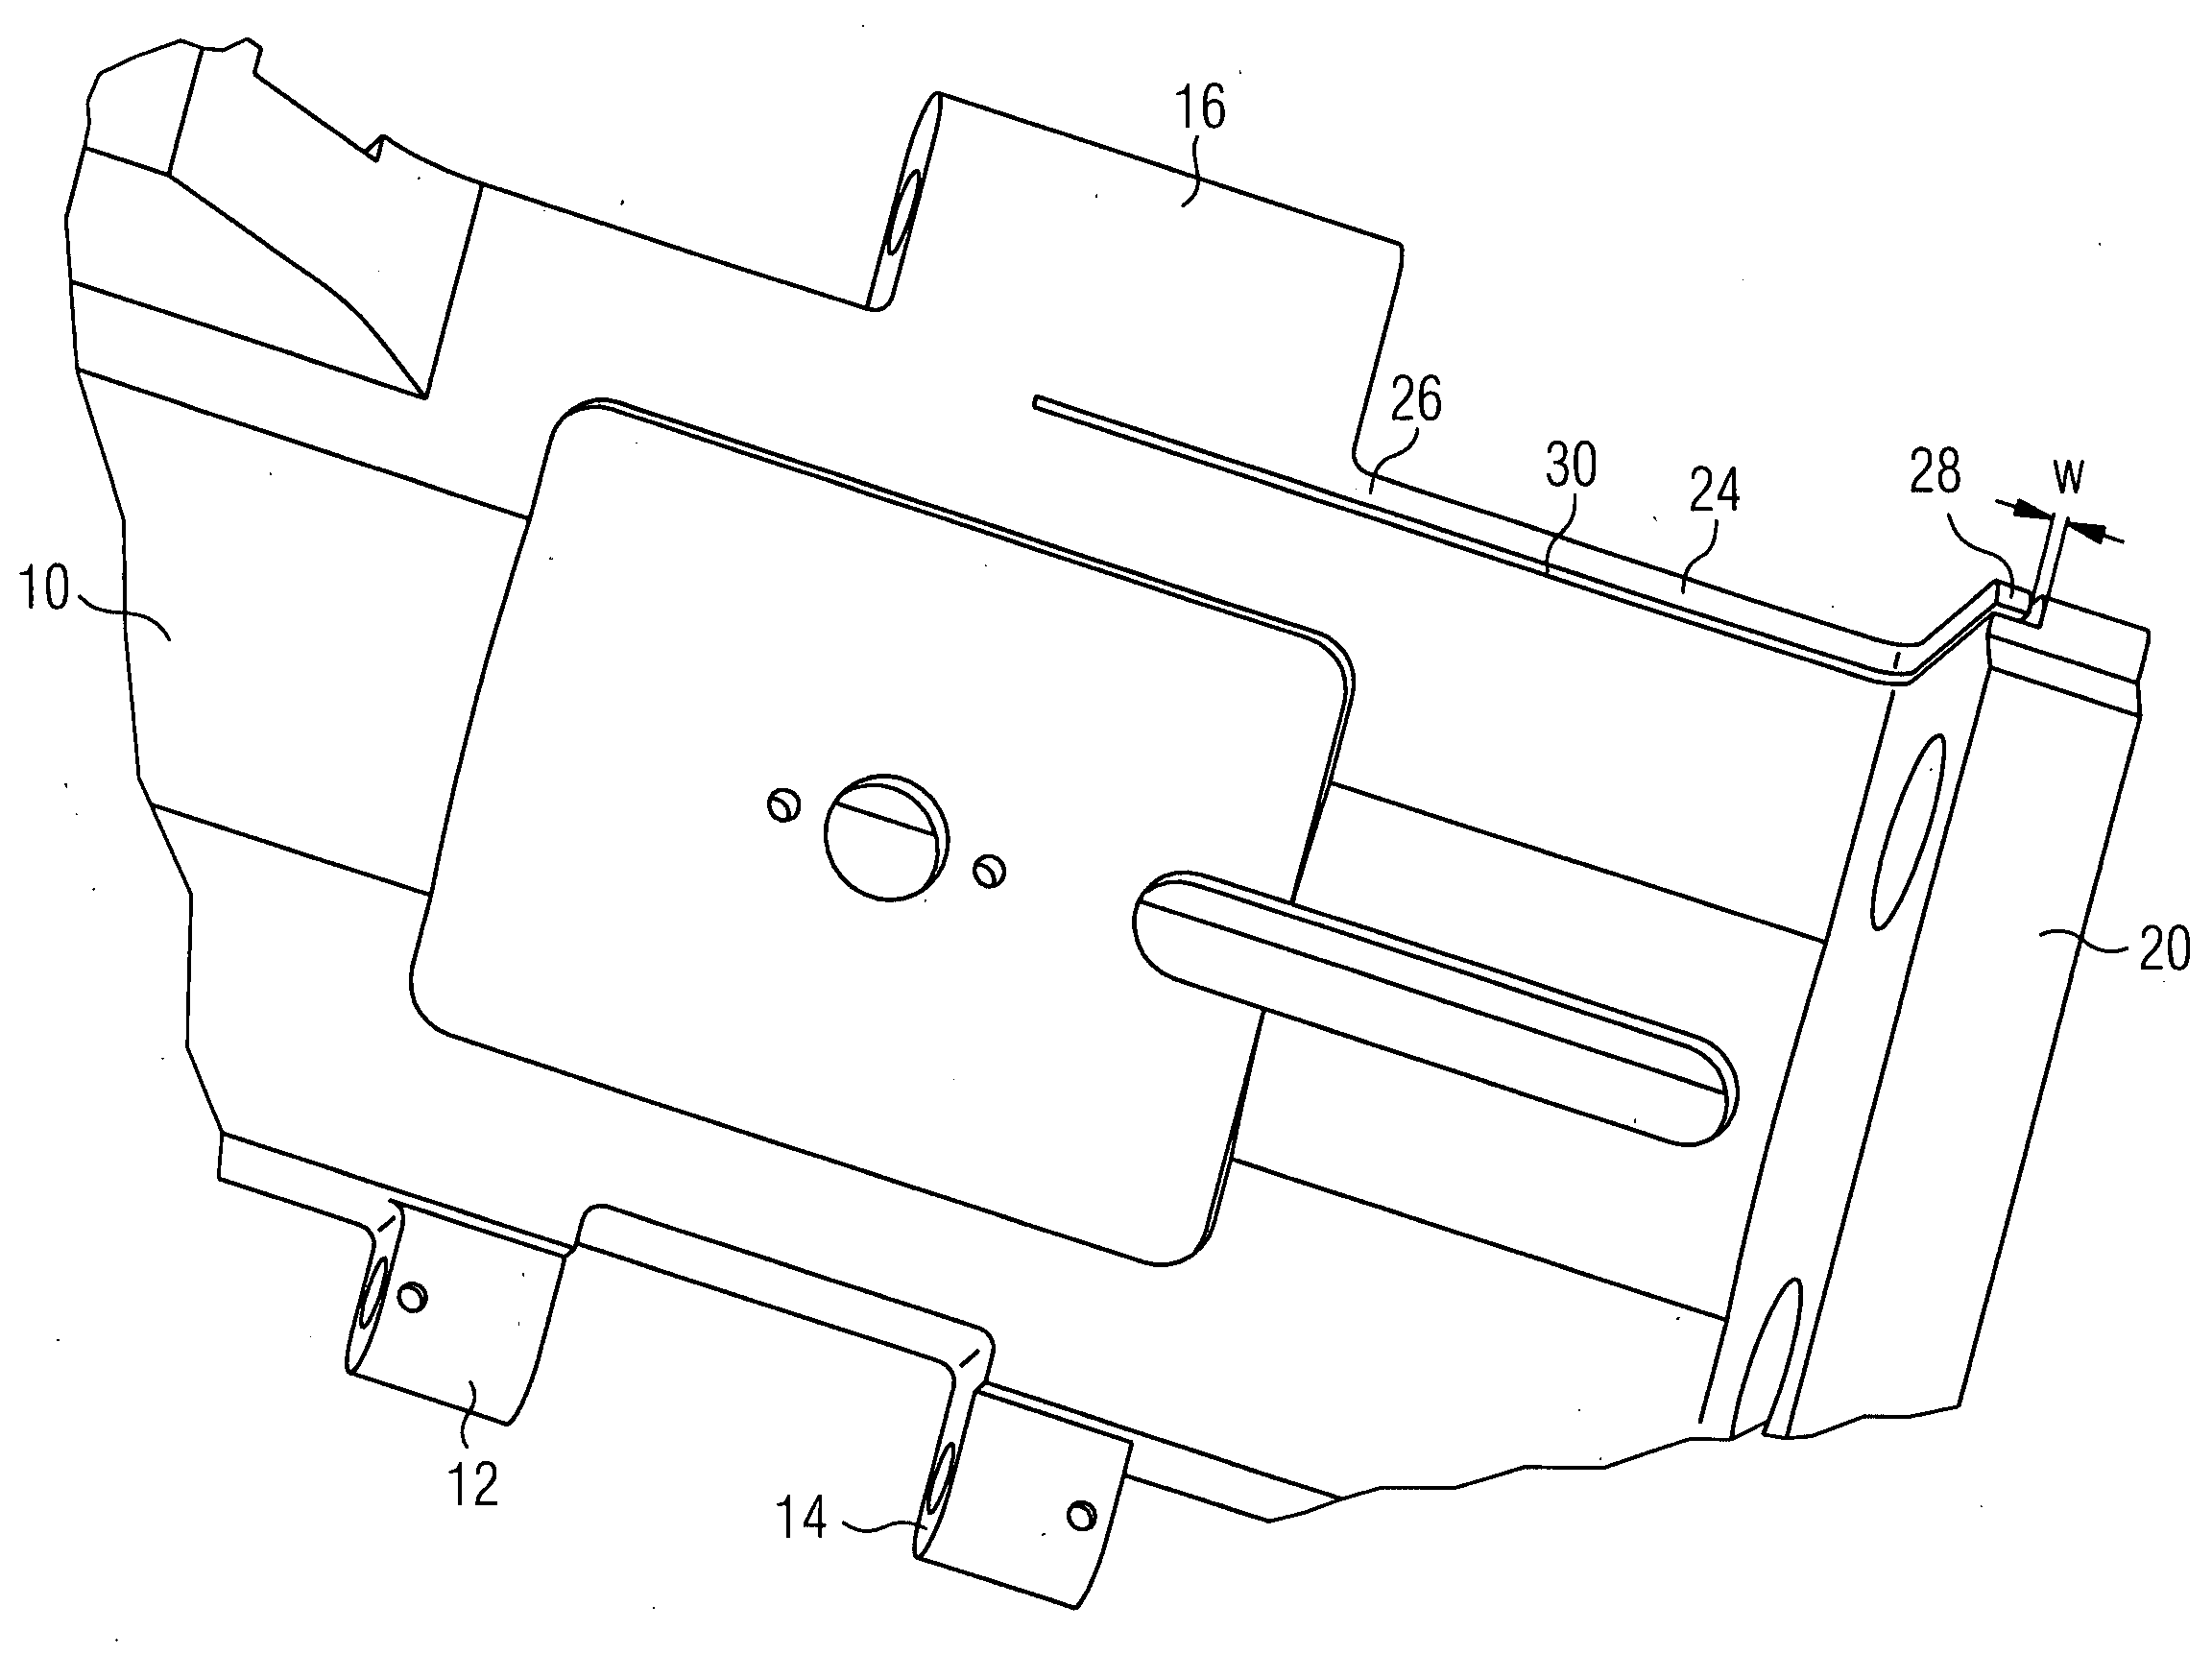 Disk Brake Provided With an Improved Device for Measuring the Normal Applied Force